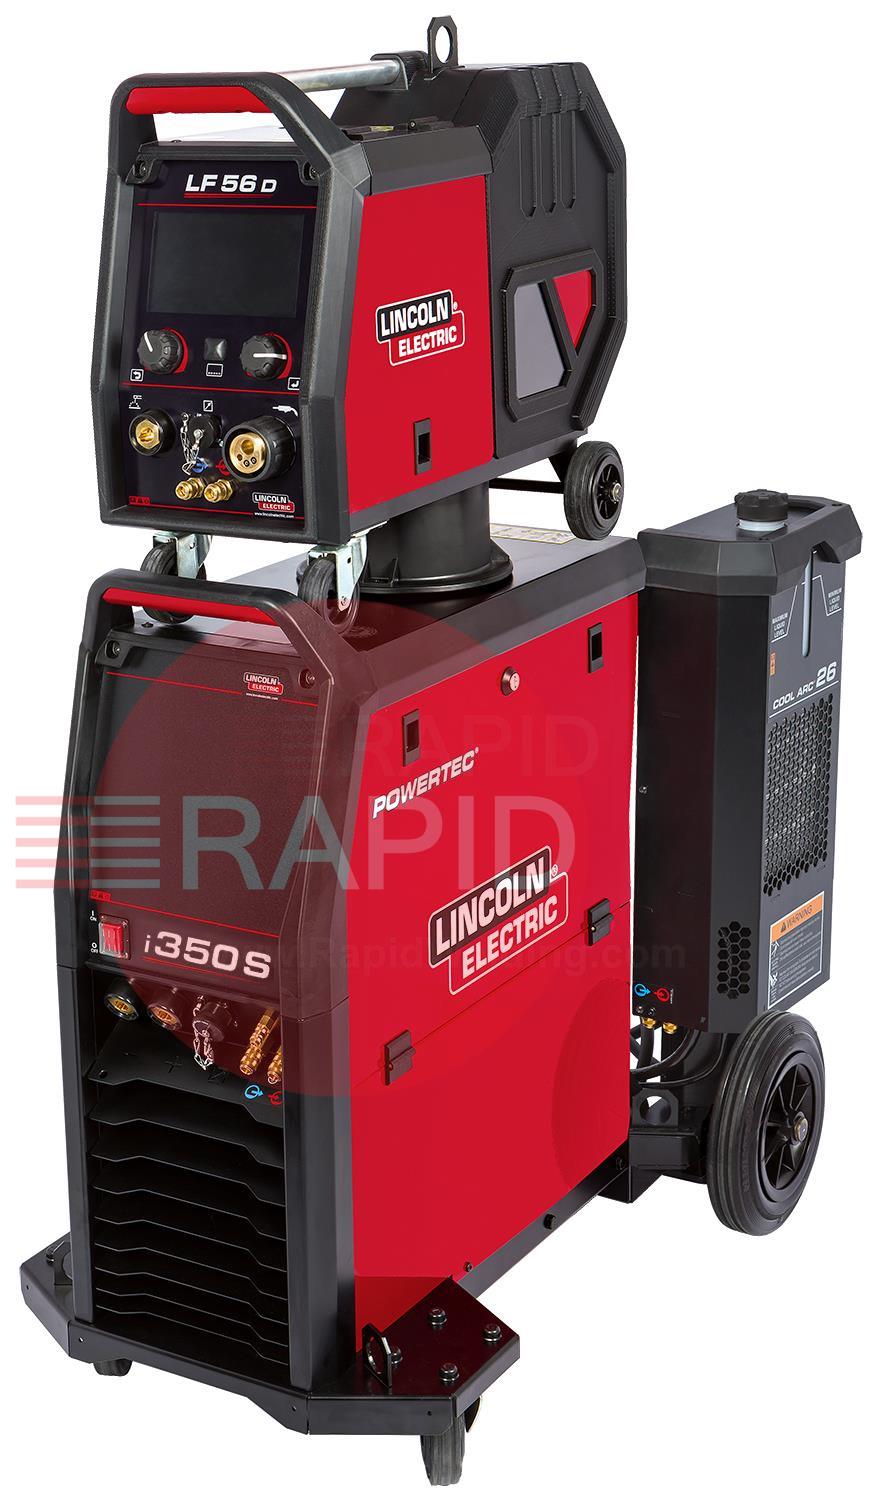 K14183-56-1WP  Lincoln Powertec i350S MIG Welder & LF-56D Wire Feeder Water Cooled Ready To Weld Package - 400v, 3ph